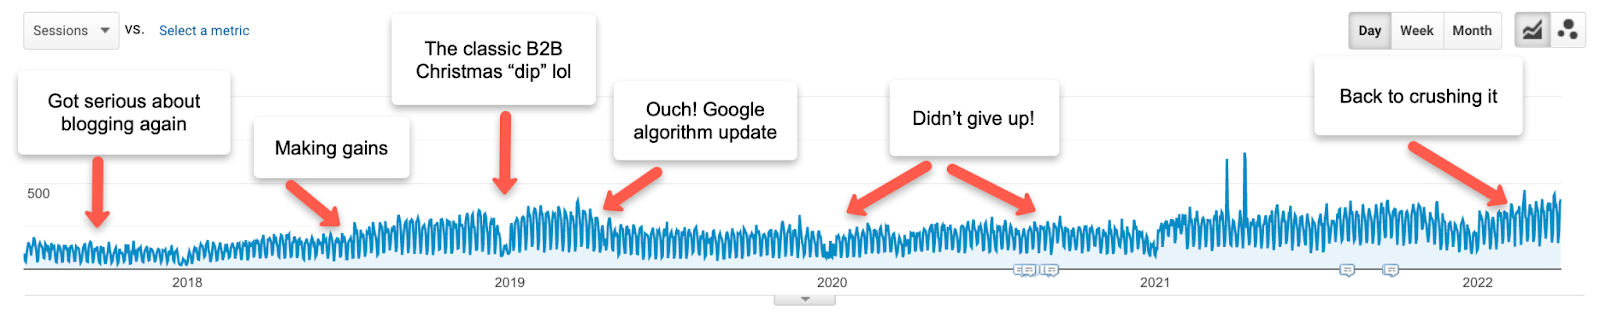 screenshot of Forge and Smith blog post data for organic search traffic, from 2018 to early 2022